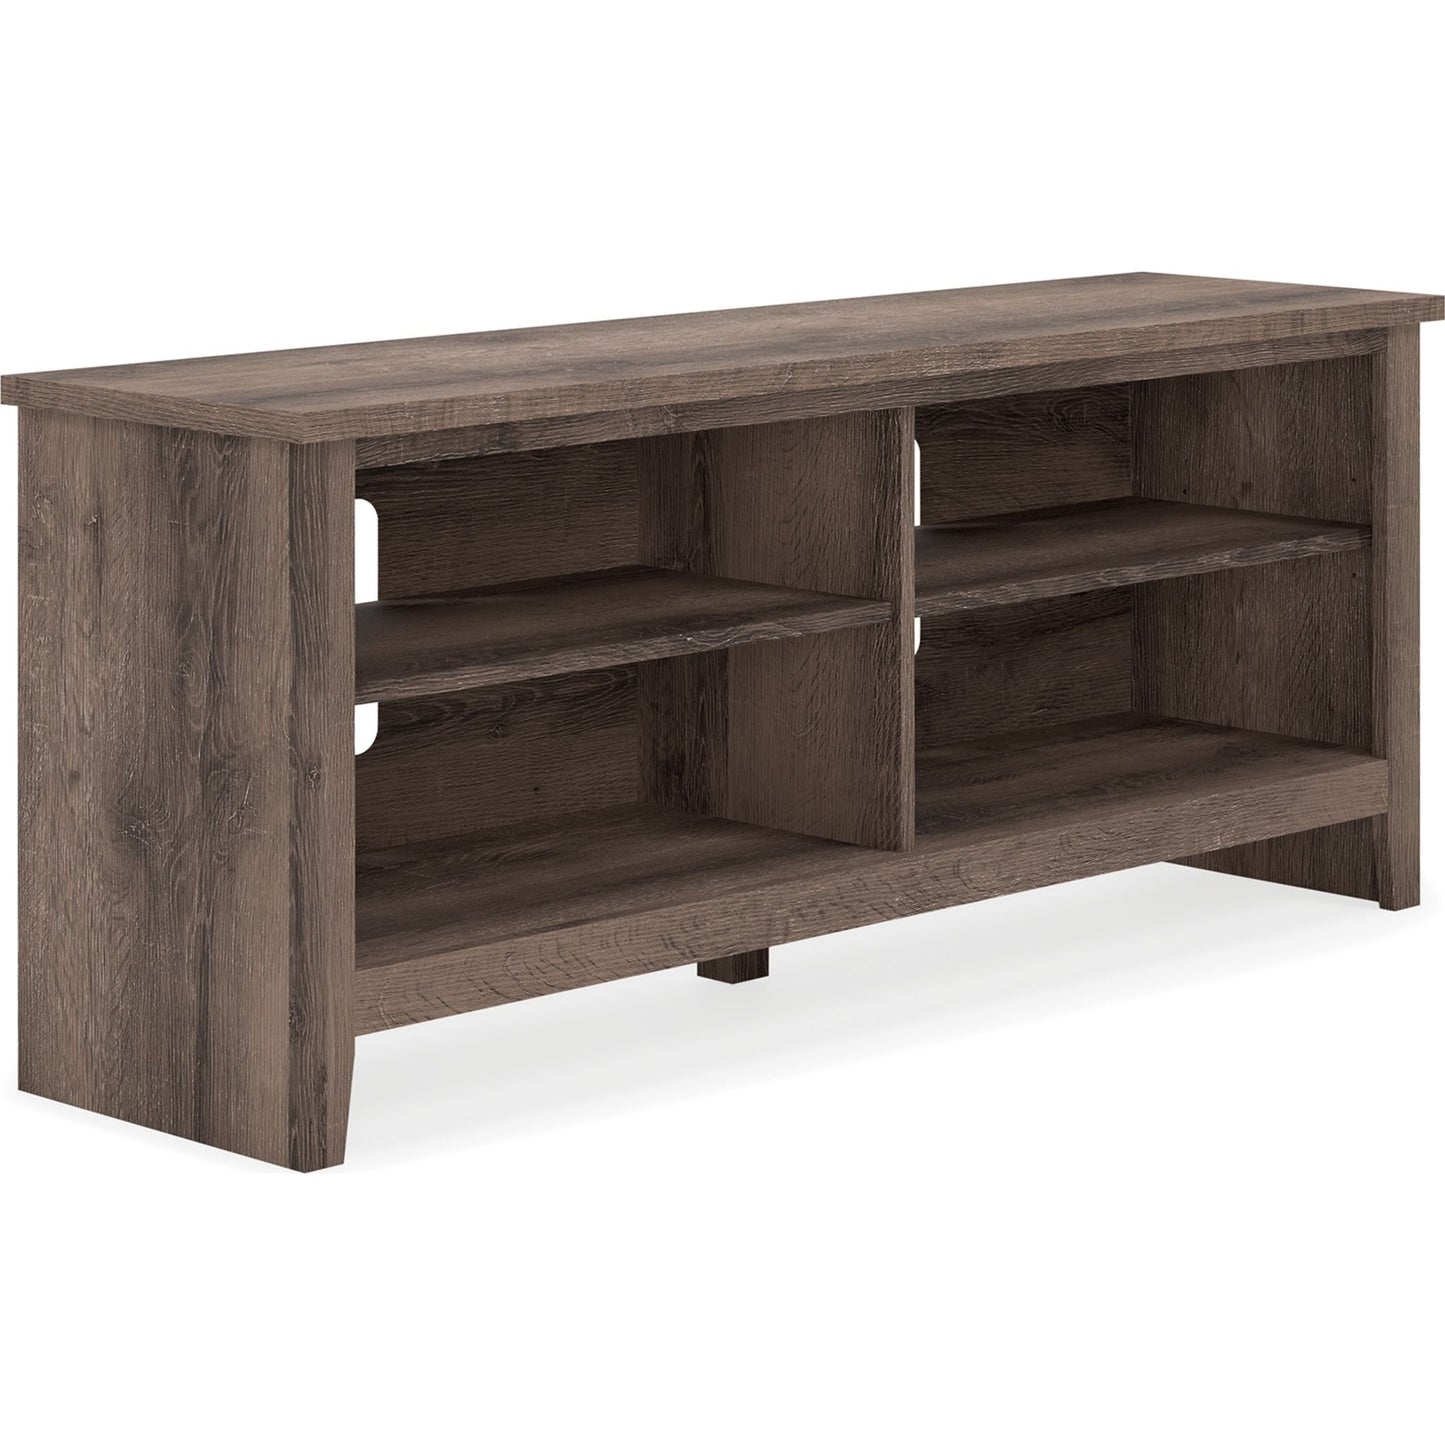 Arlenbry Large TV Stand - Gray